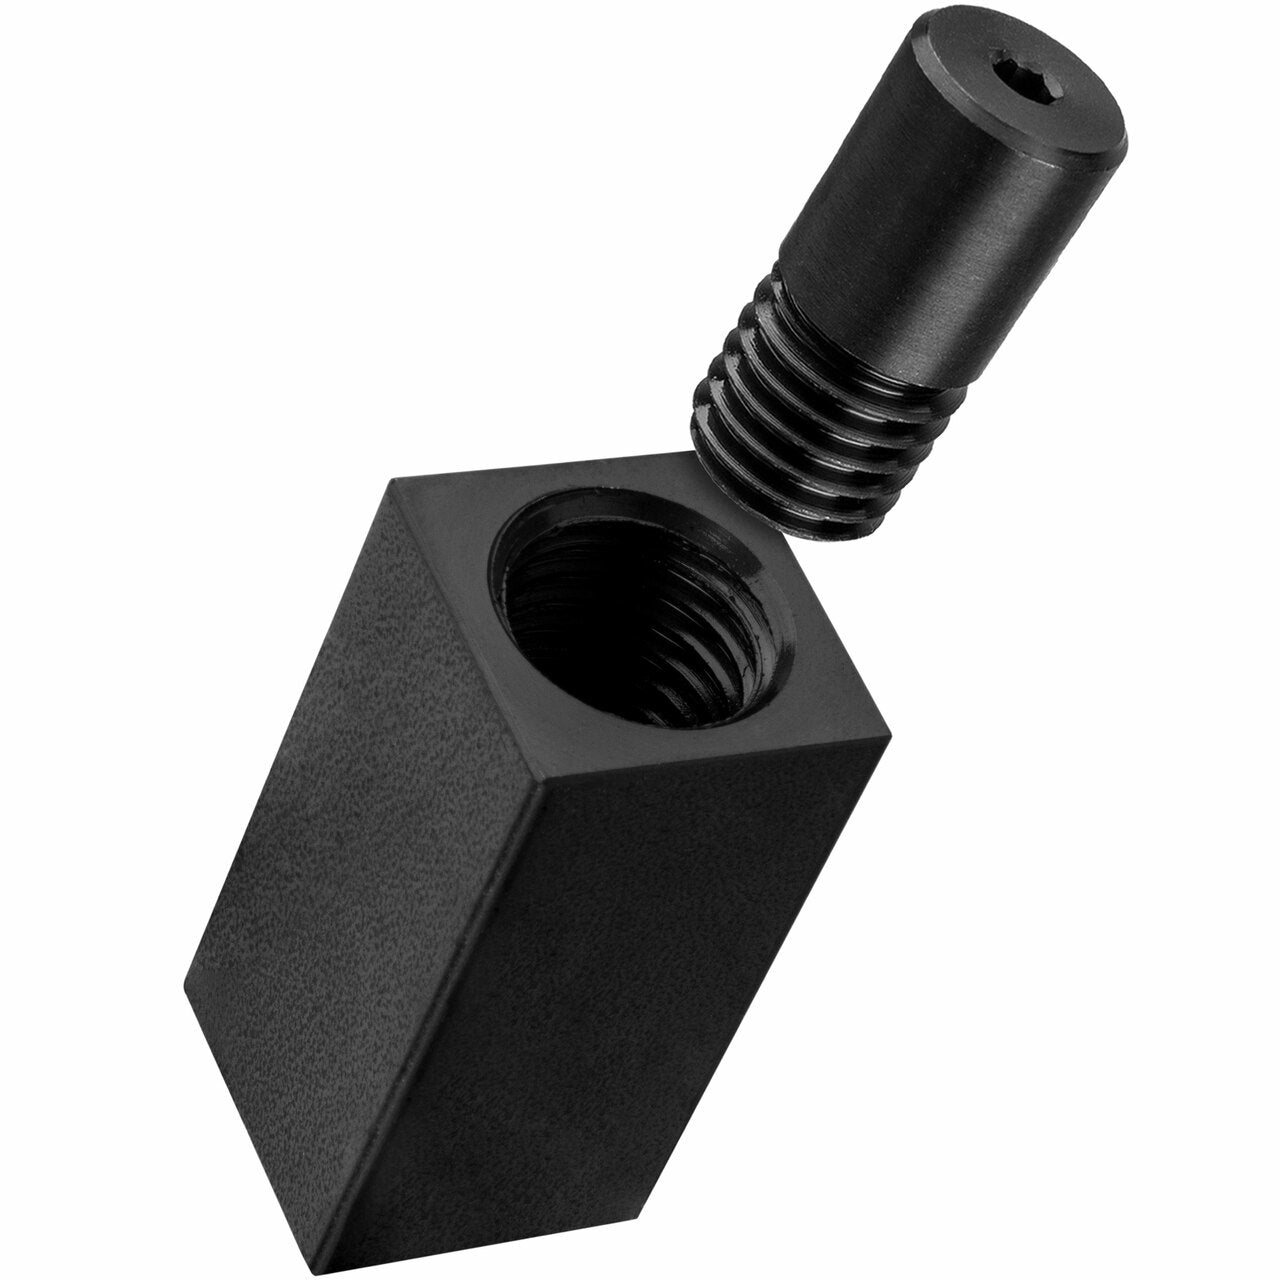 Post Pin, 1" x 2" - 5/8" System (4 Pack)